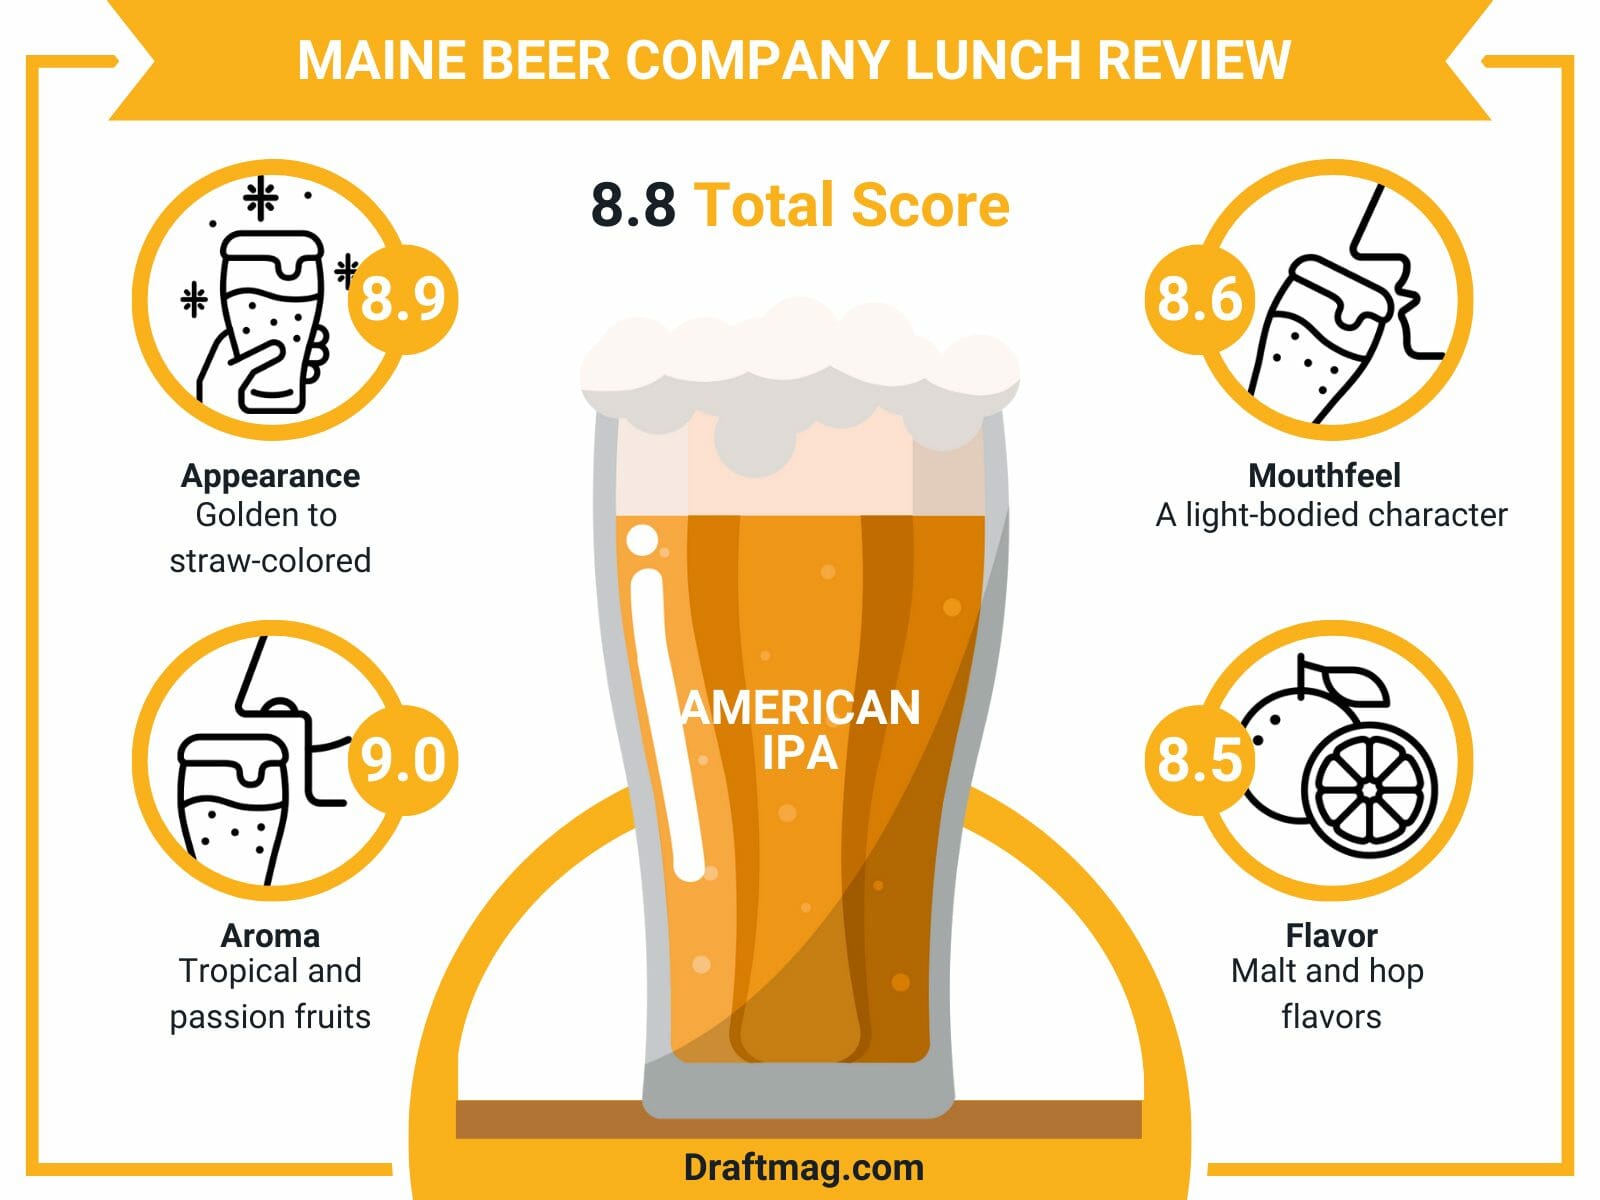 Maine beer company lunch review infographic